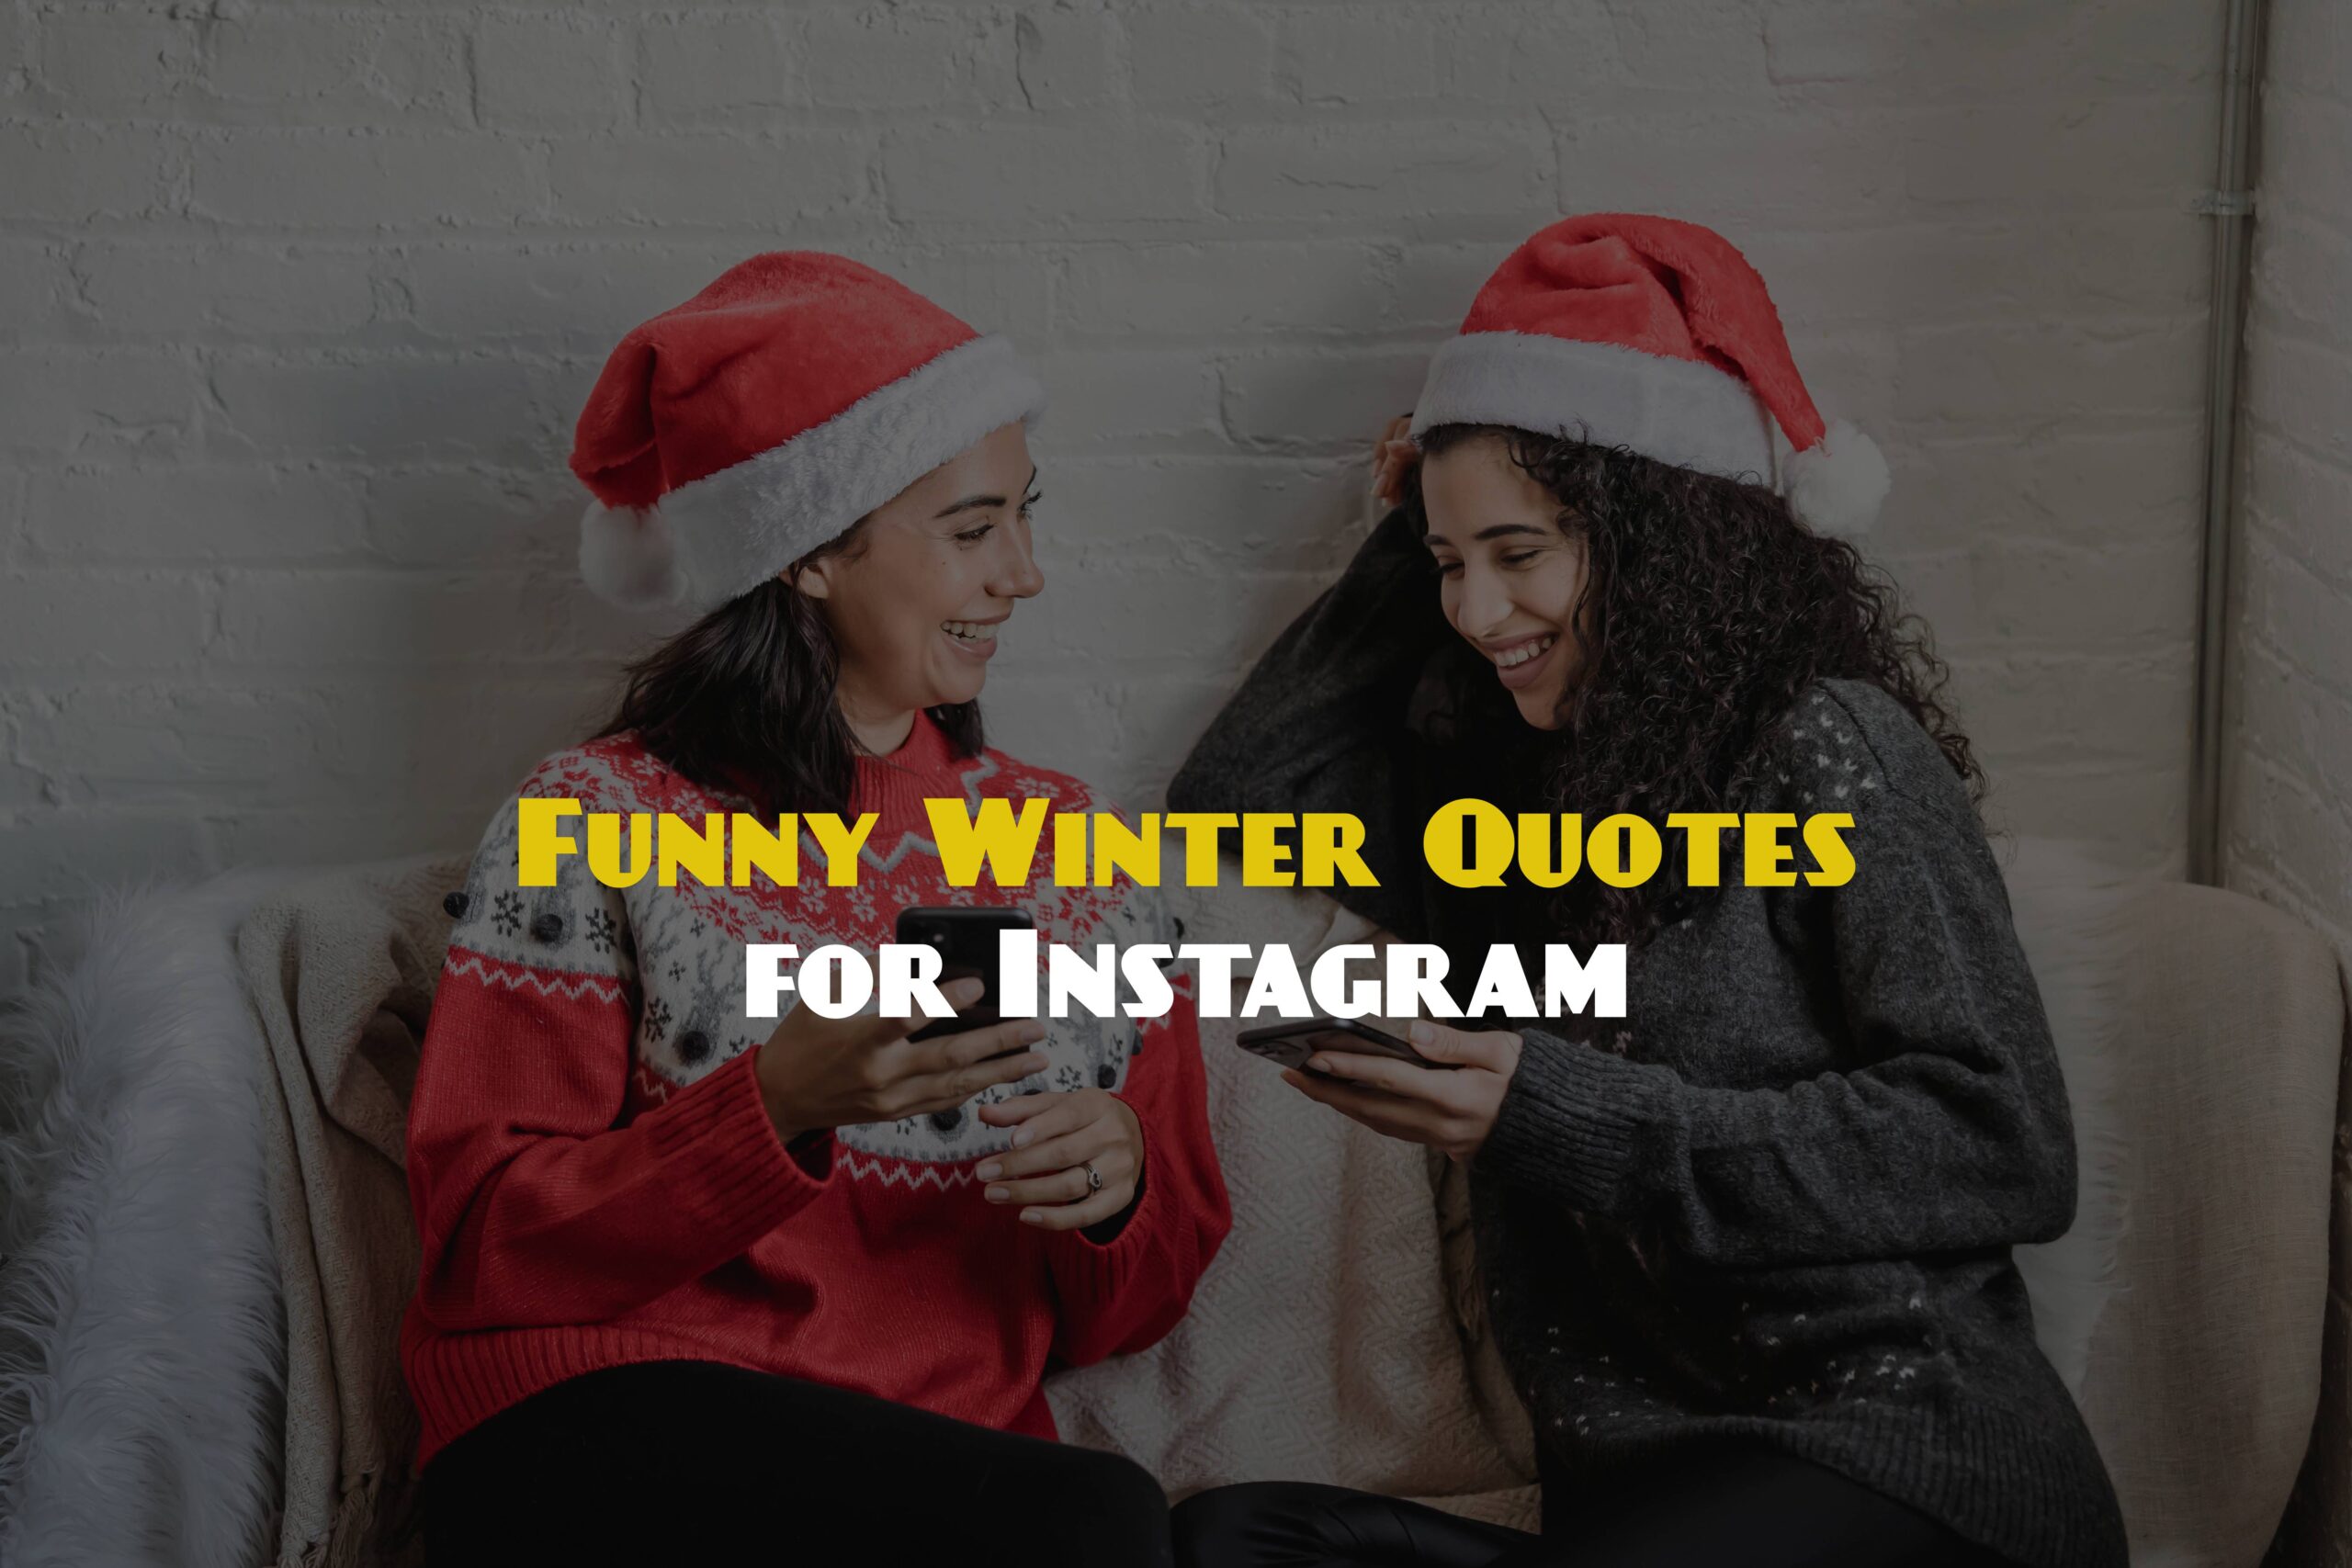 Funny Winter Quotes for Instagram